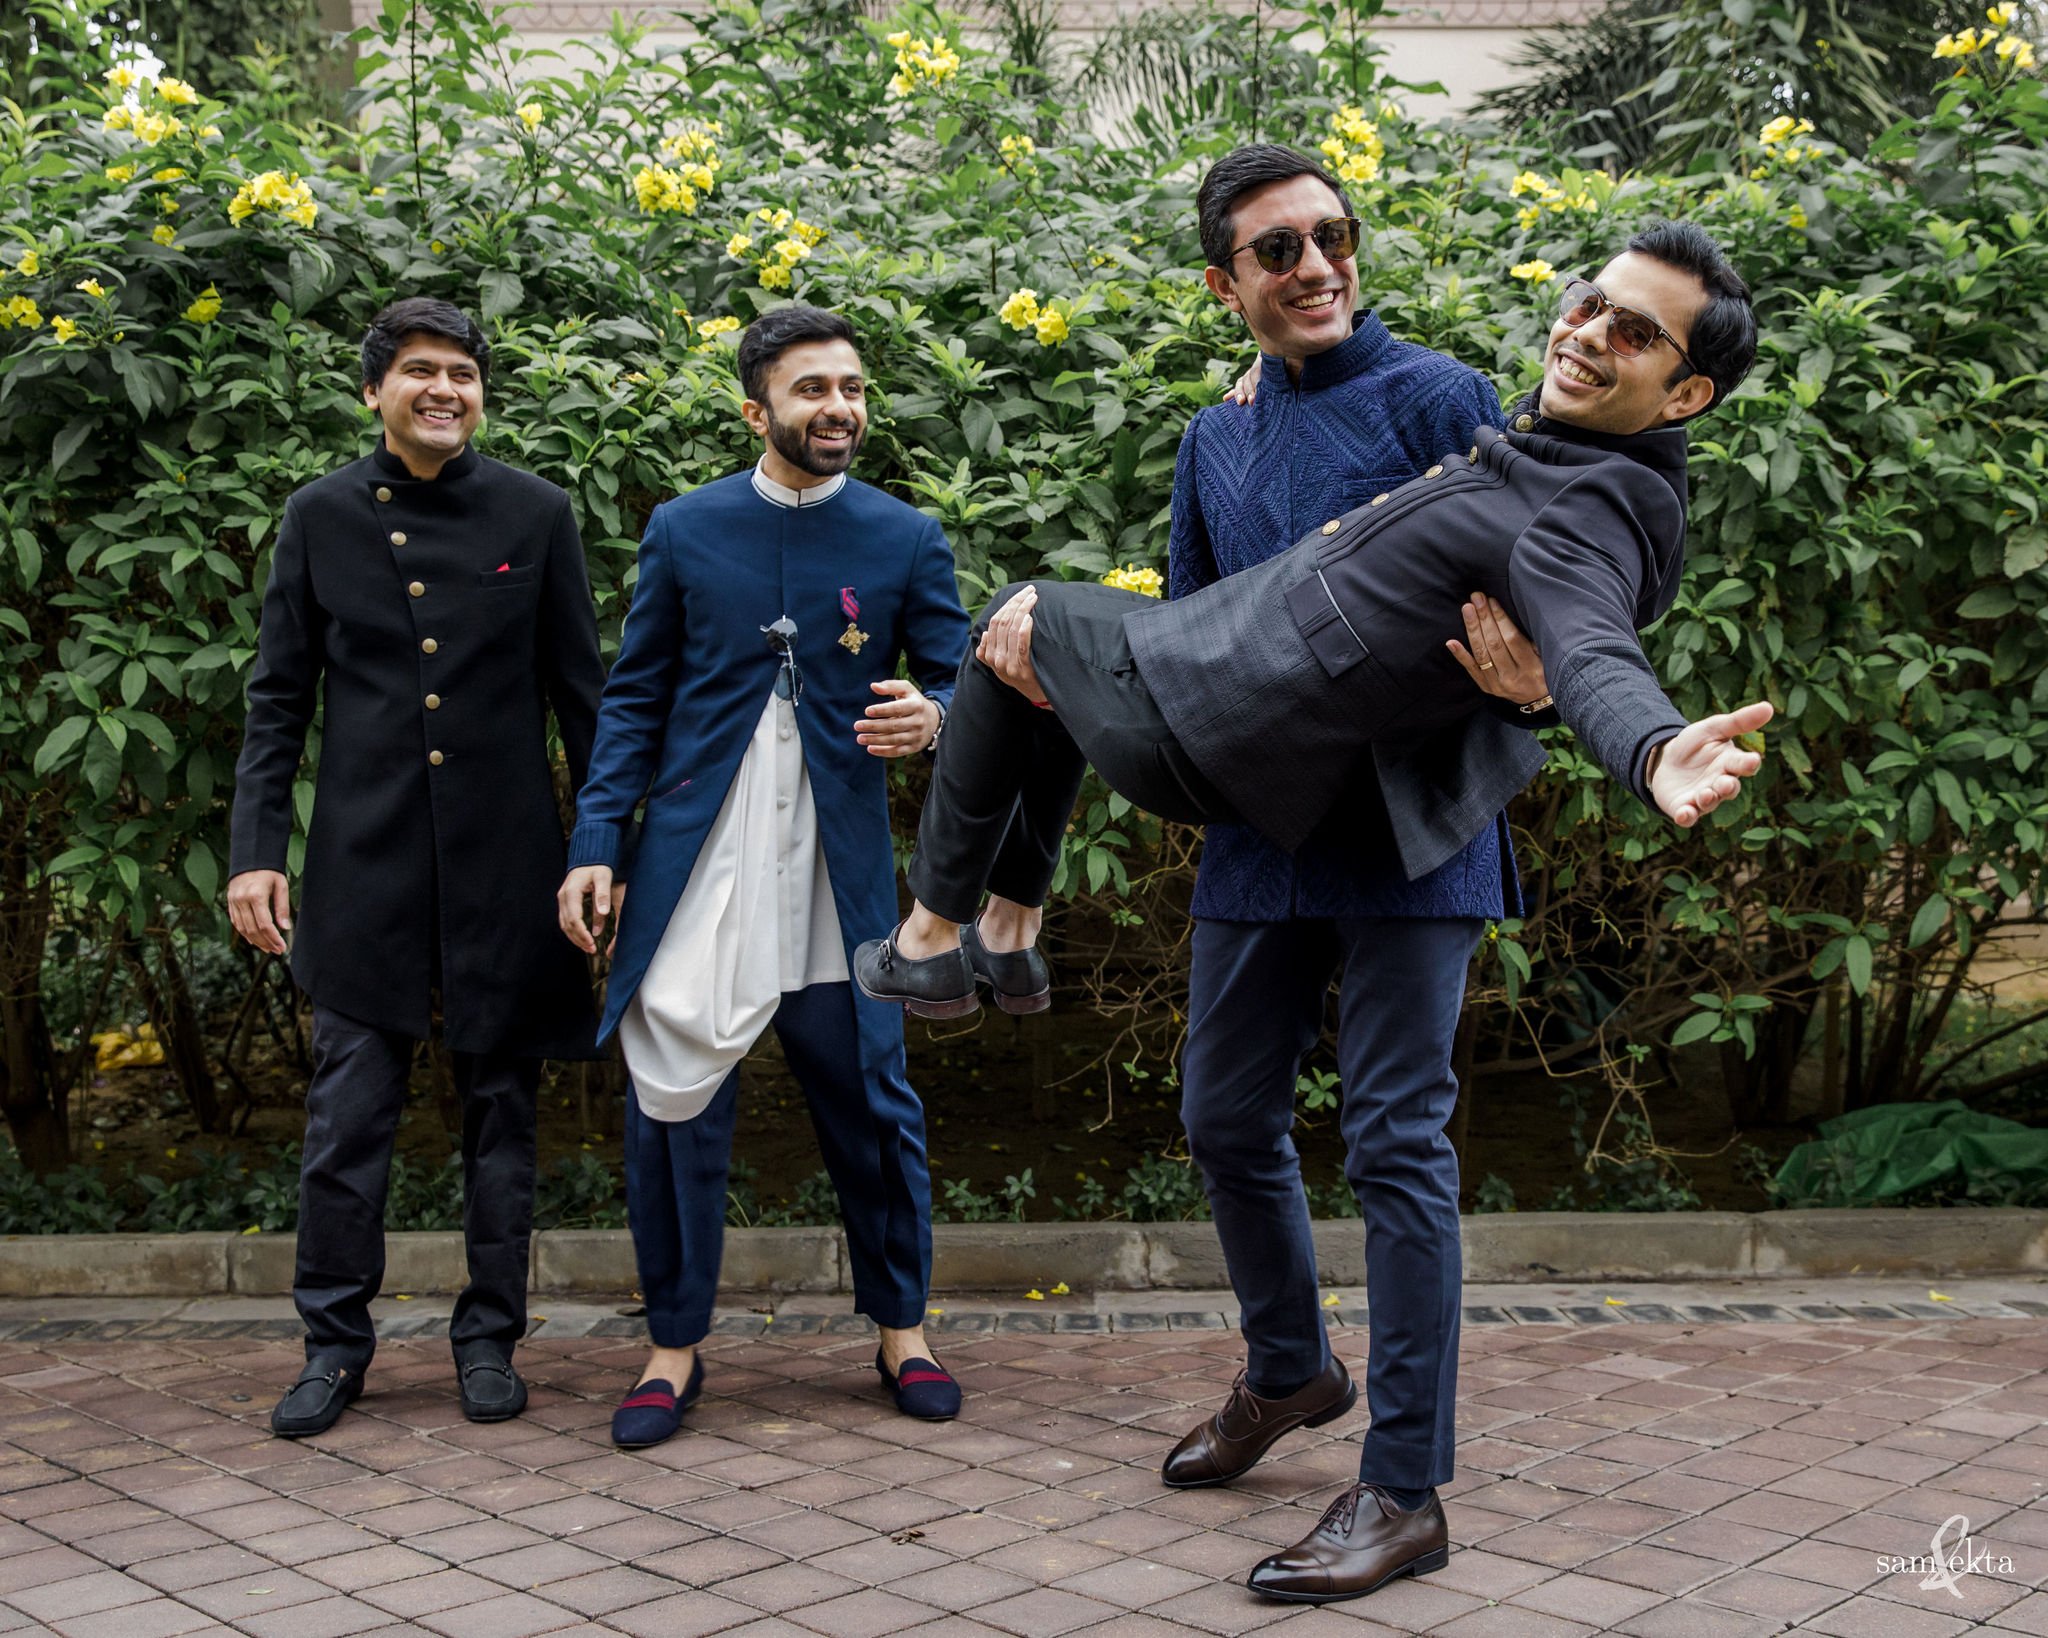 Thanks to the prediction of rains on their wedding day, Saba &amp; Ishaan decided to have their baraat on the day before the wedding. And as this first photo indicates, it was going to be crazy